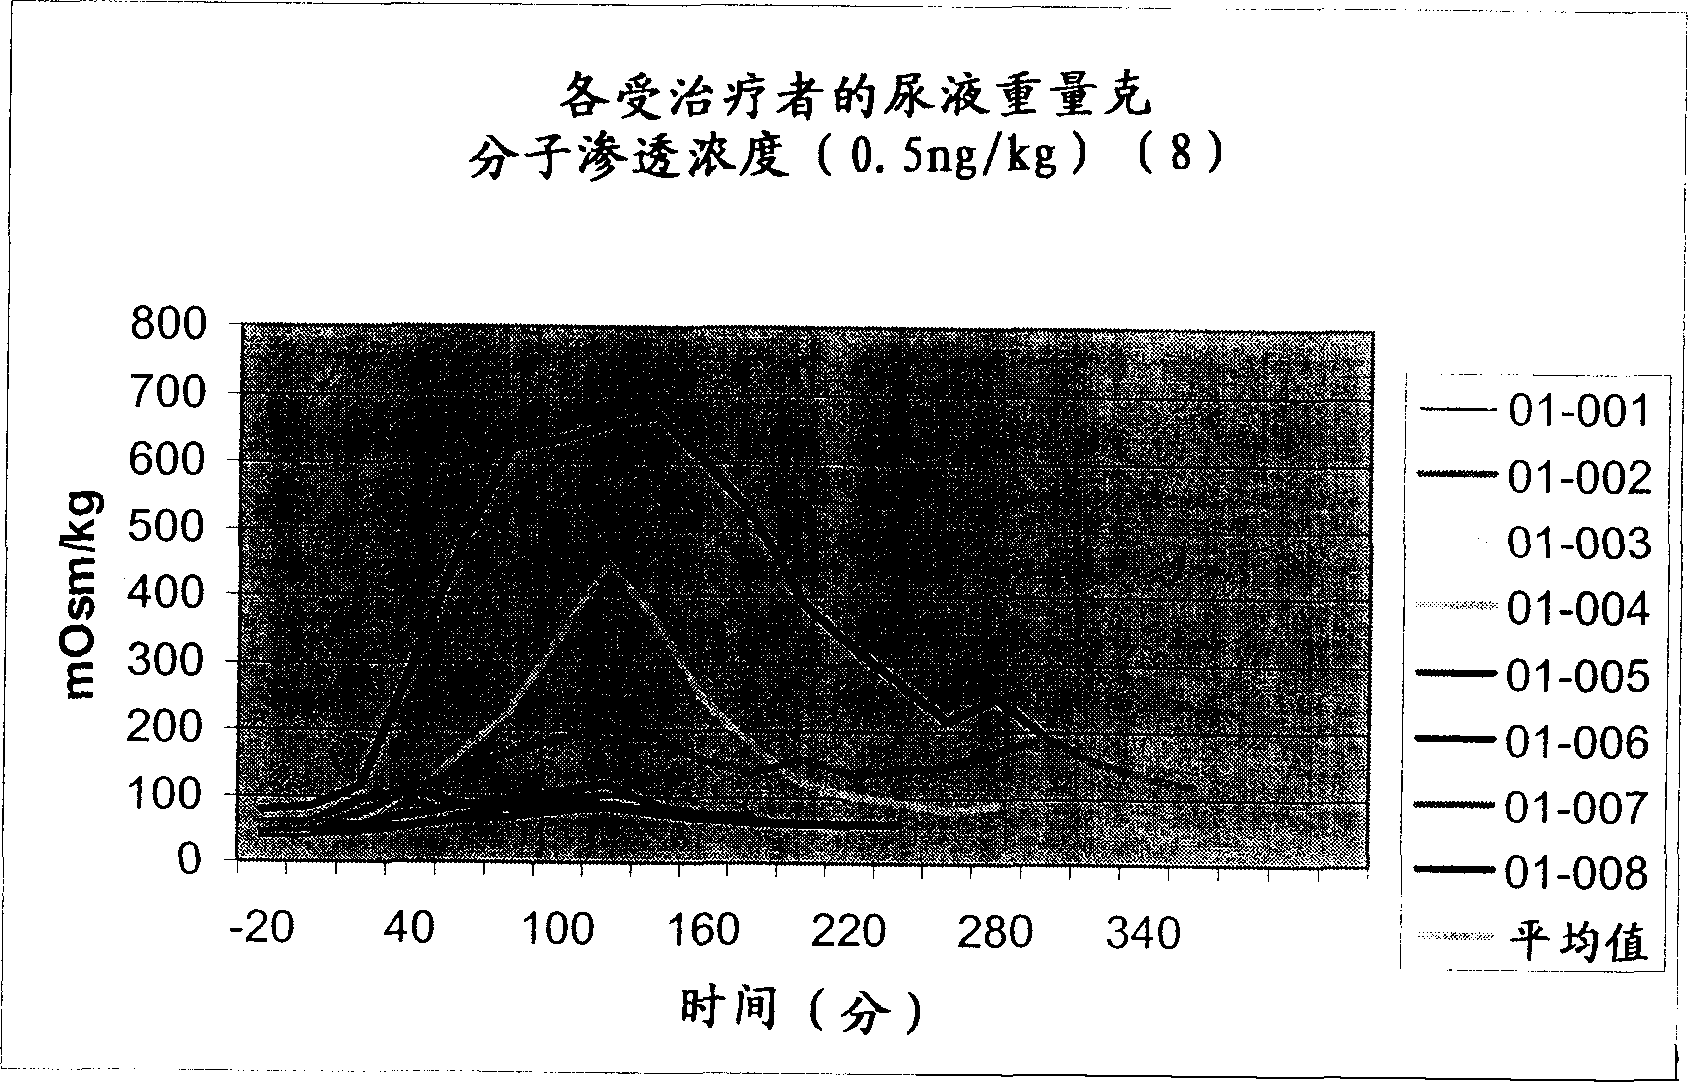 Pharmaceutical compositions including low dosages of desmopressin